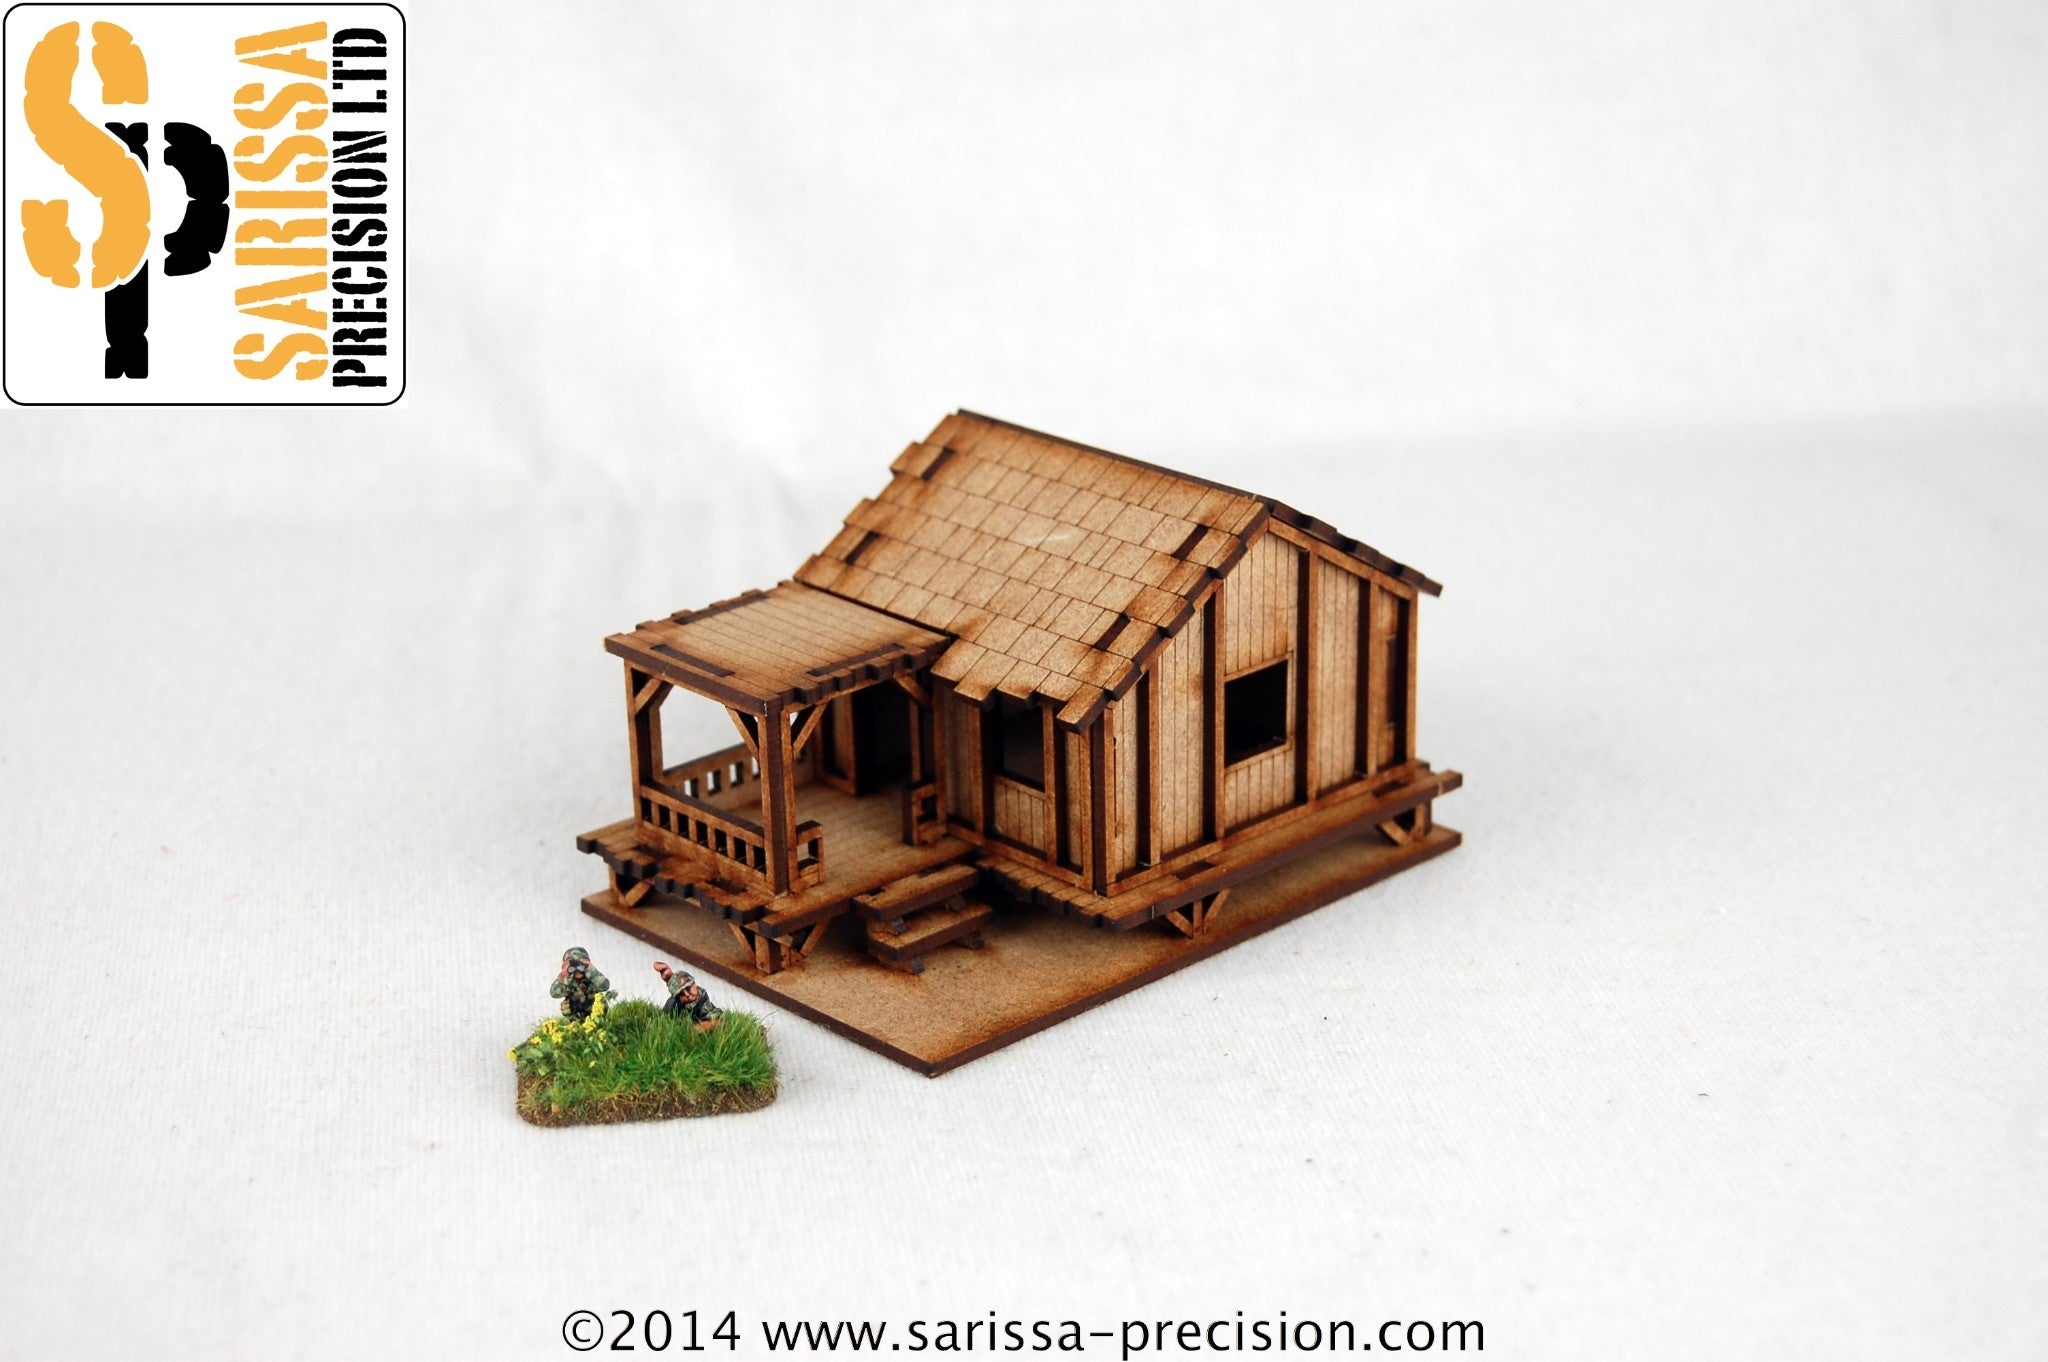 Low Planked-Style Village House - 15mm